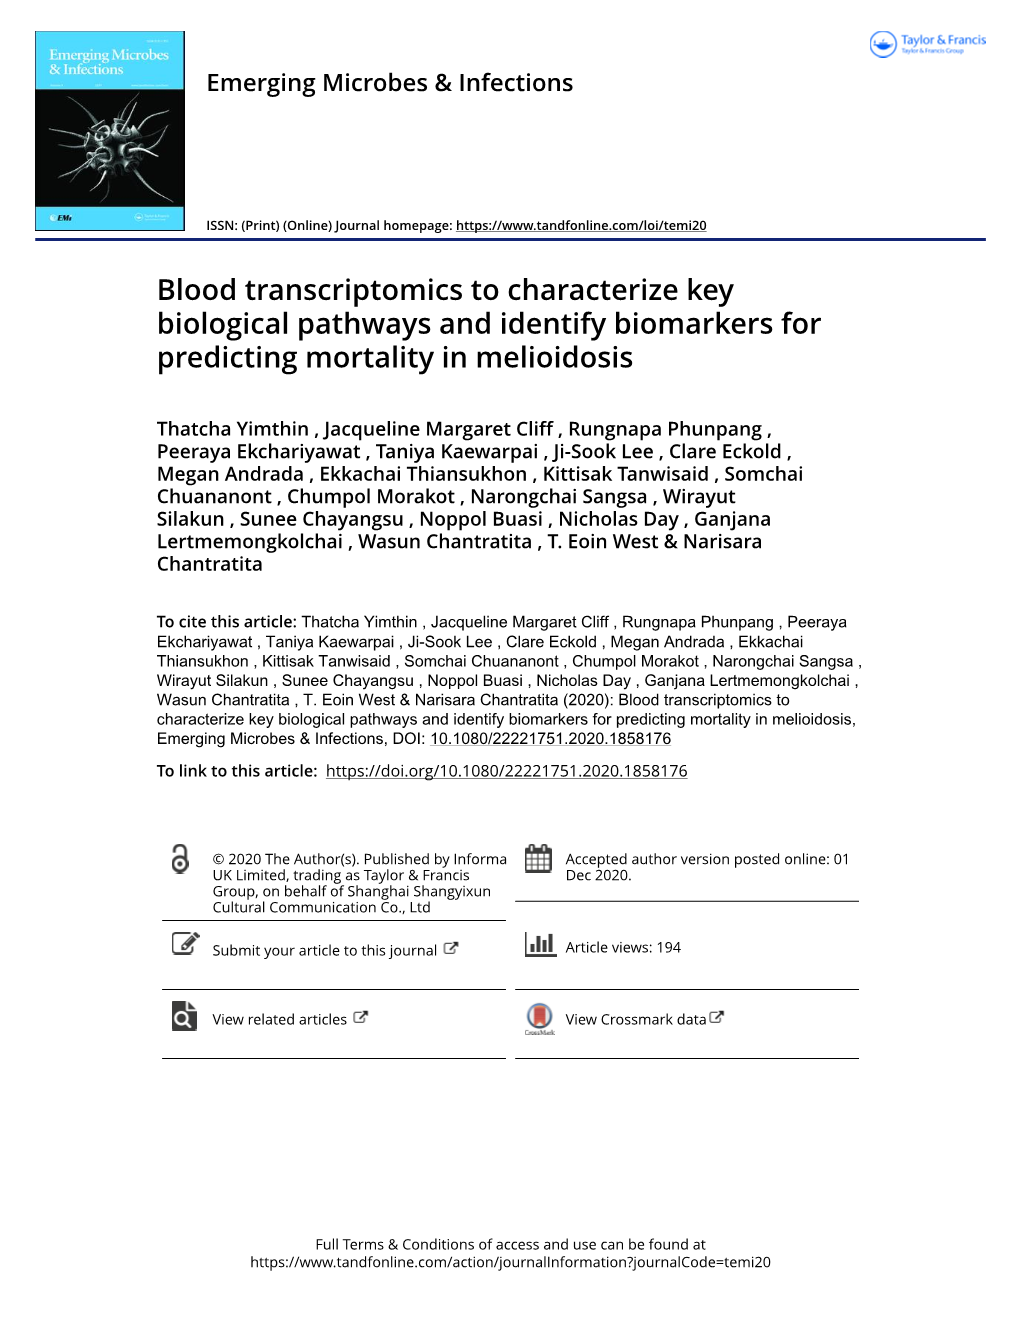 Blood Transcriptomics to Characterize Key Biological Pathways and Identify Biomarkers for Predicting Mortality in Melioidosis